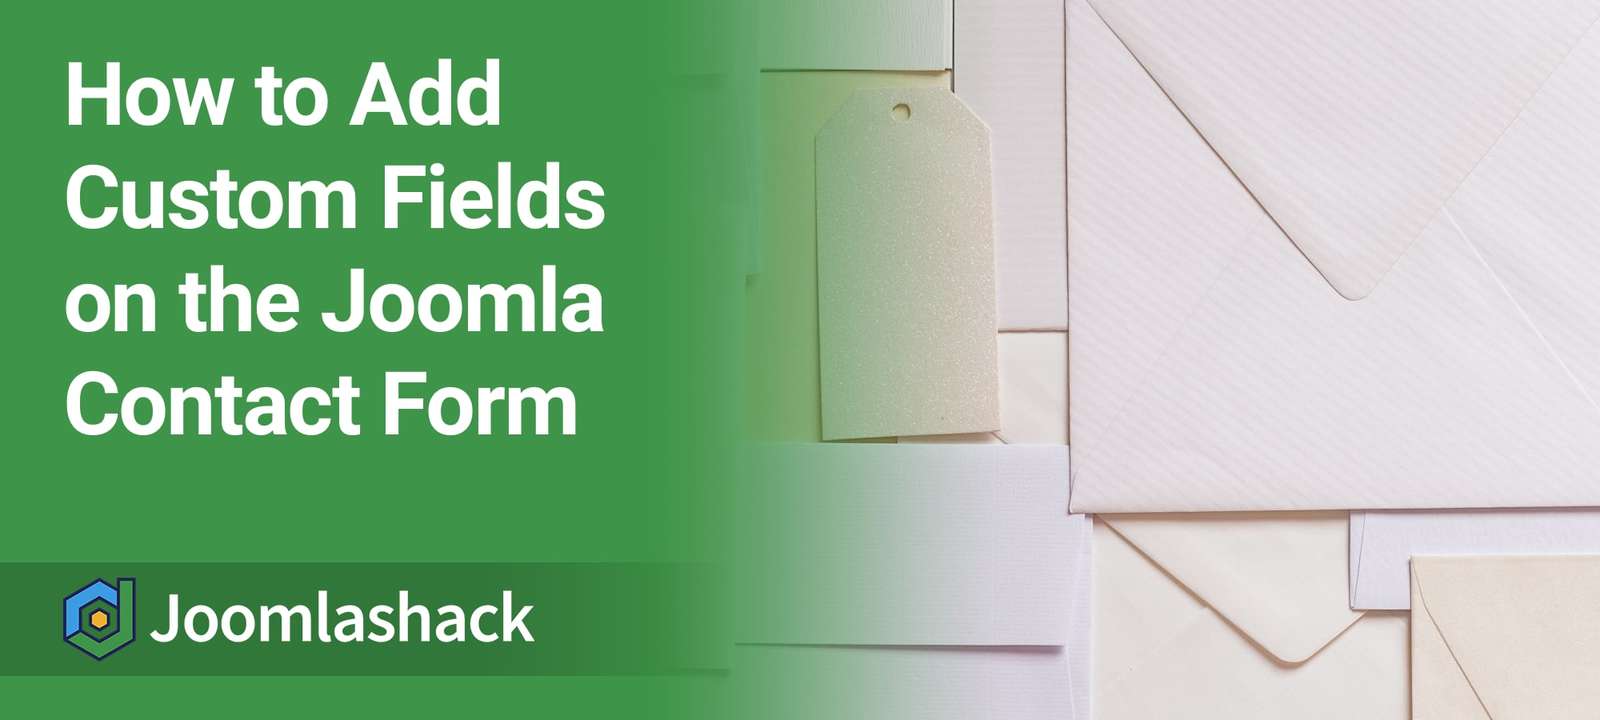 How to Add Custom Fields to the Joomla Contact Form